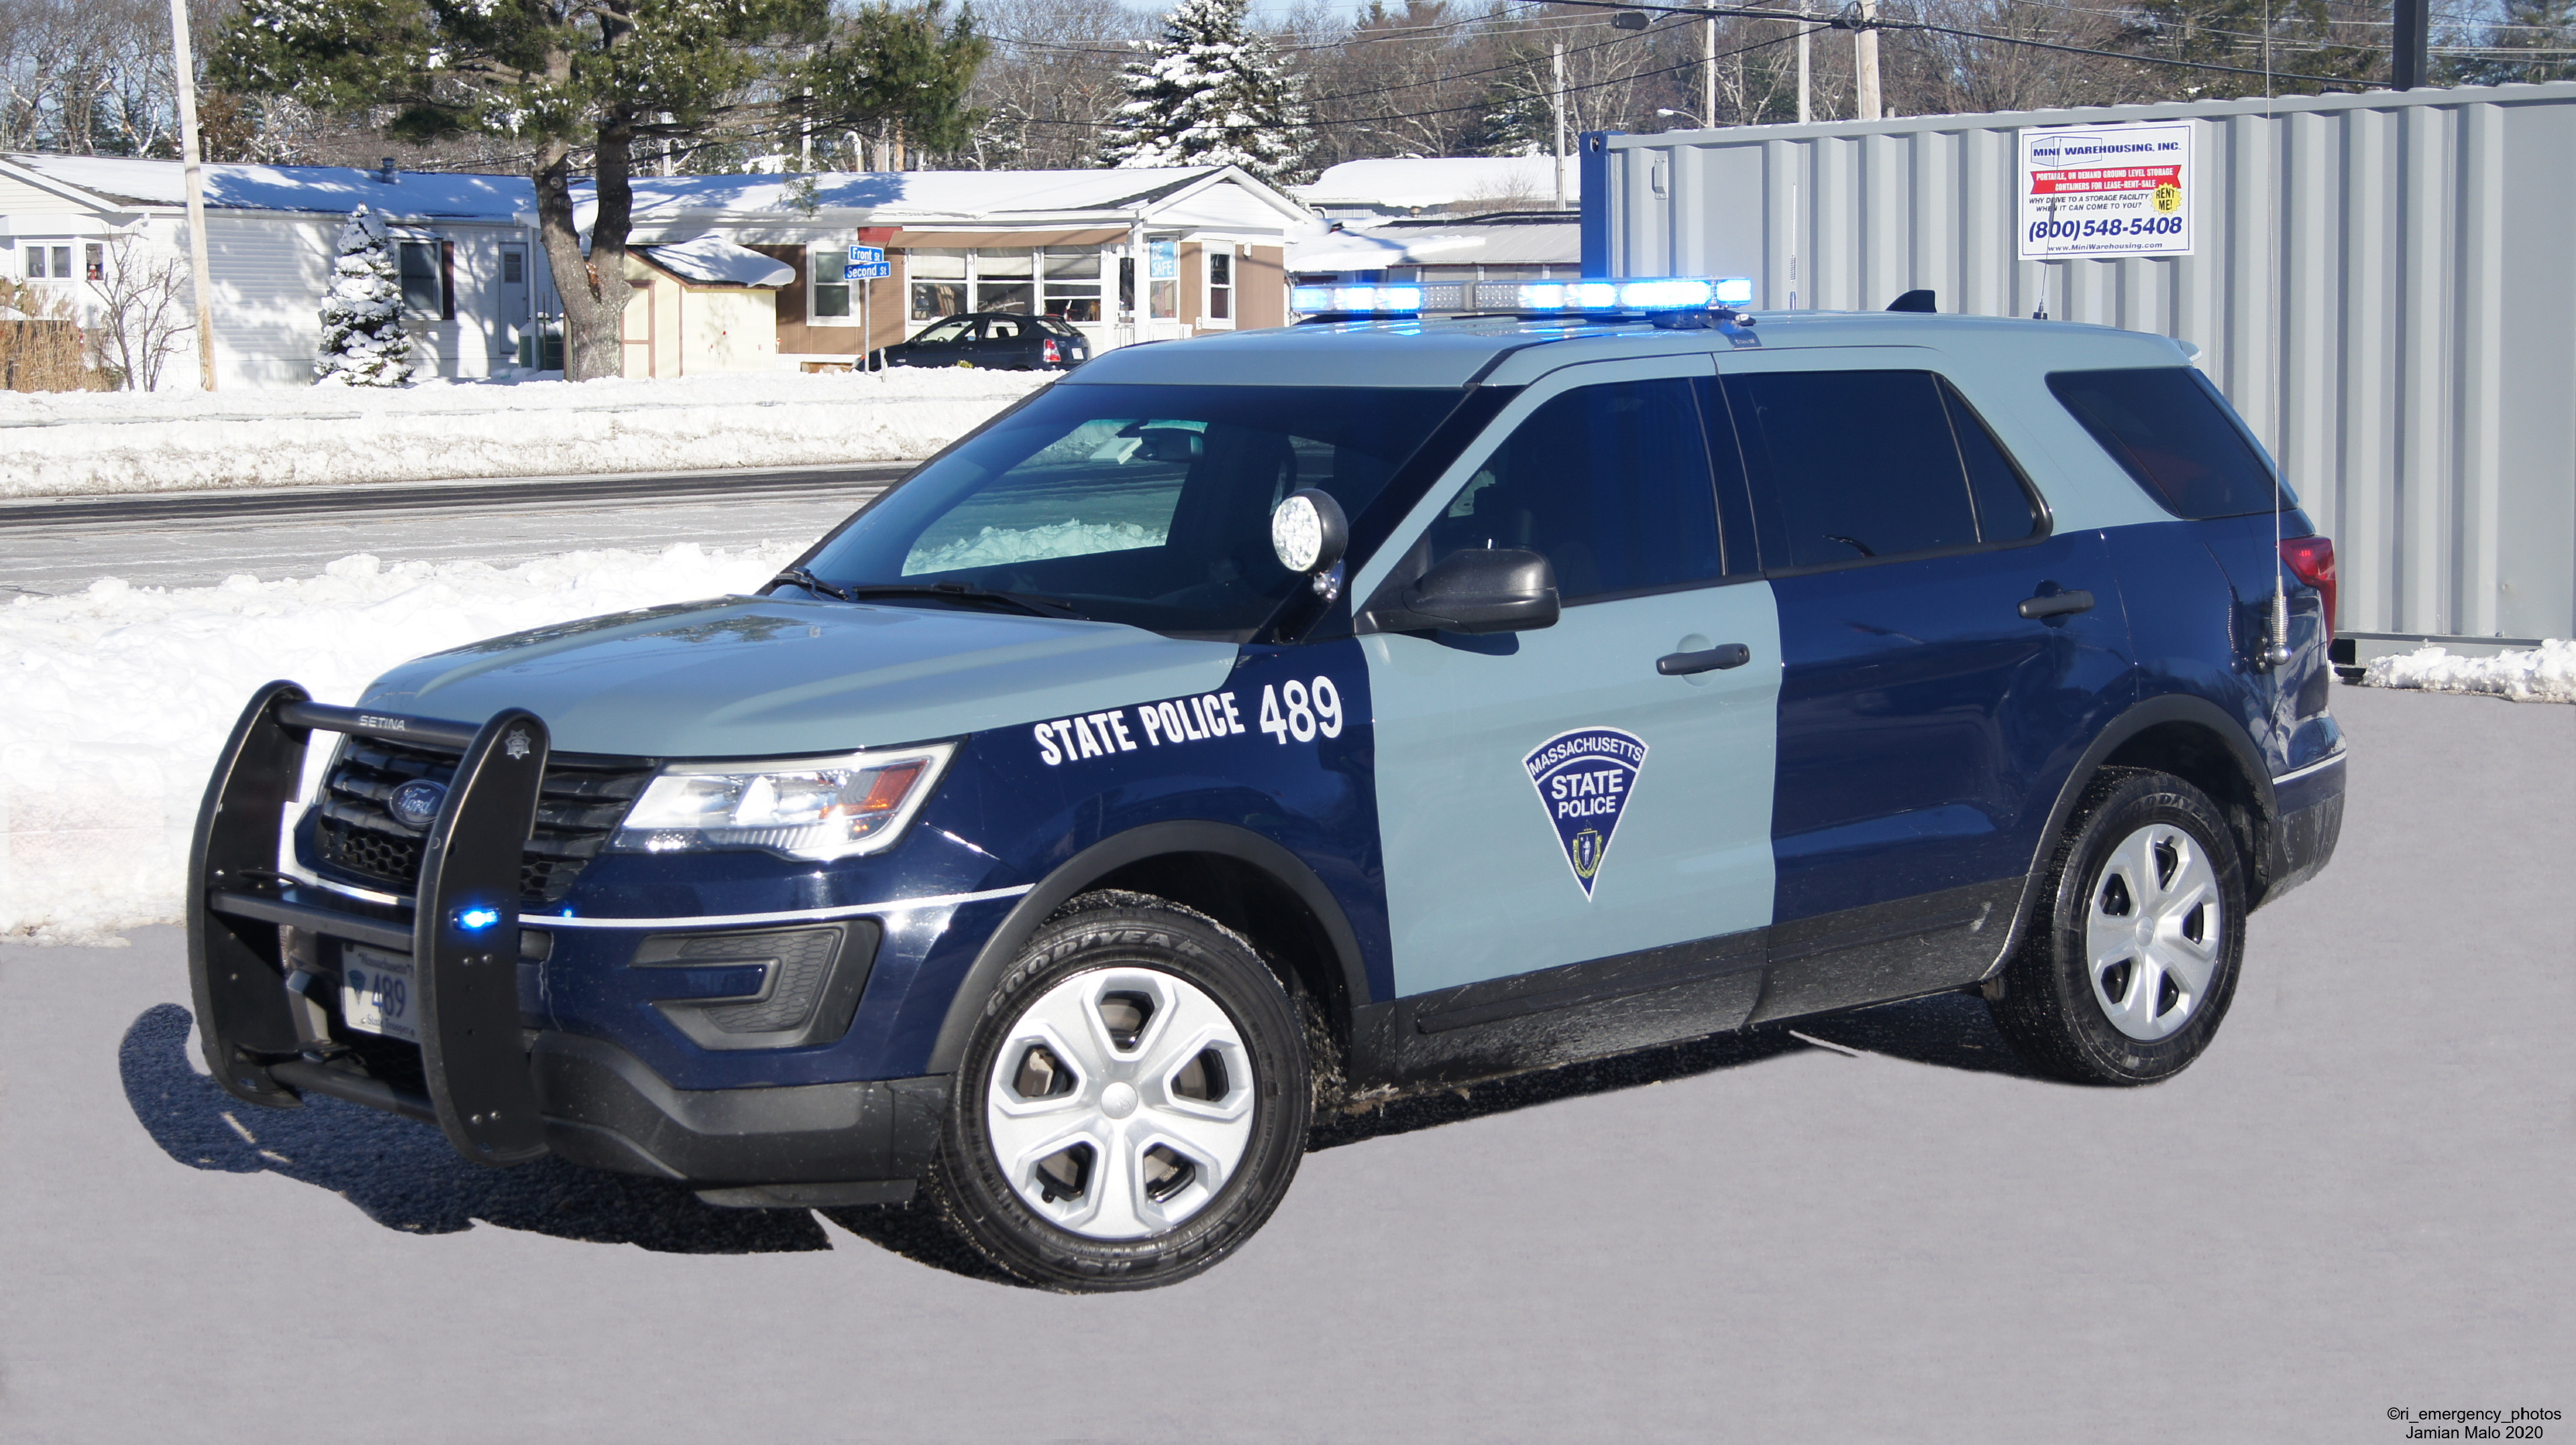 A photo  of Massachusetts State Police
            Cruiser 489, a 2017 Ford Police Interceptor Utility             taken by Jamian Malo